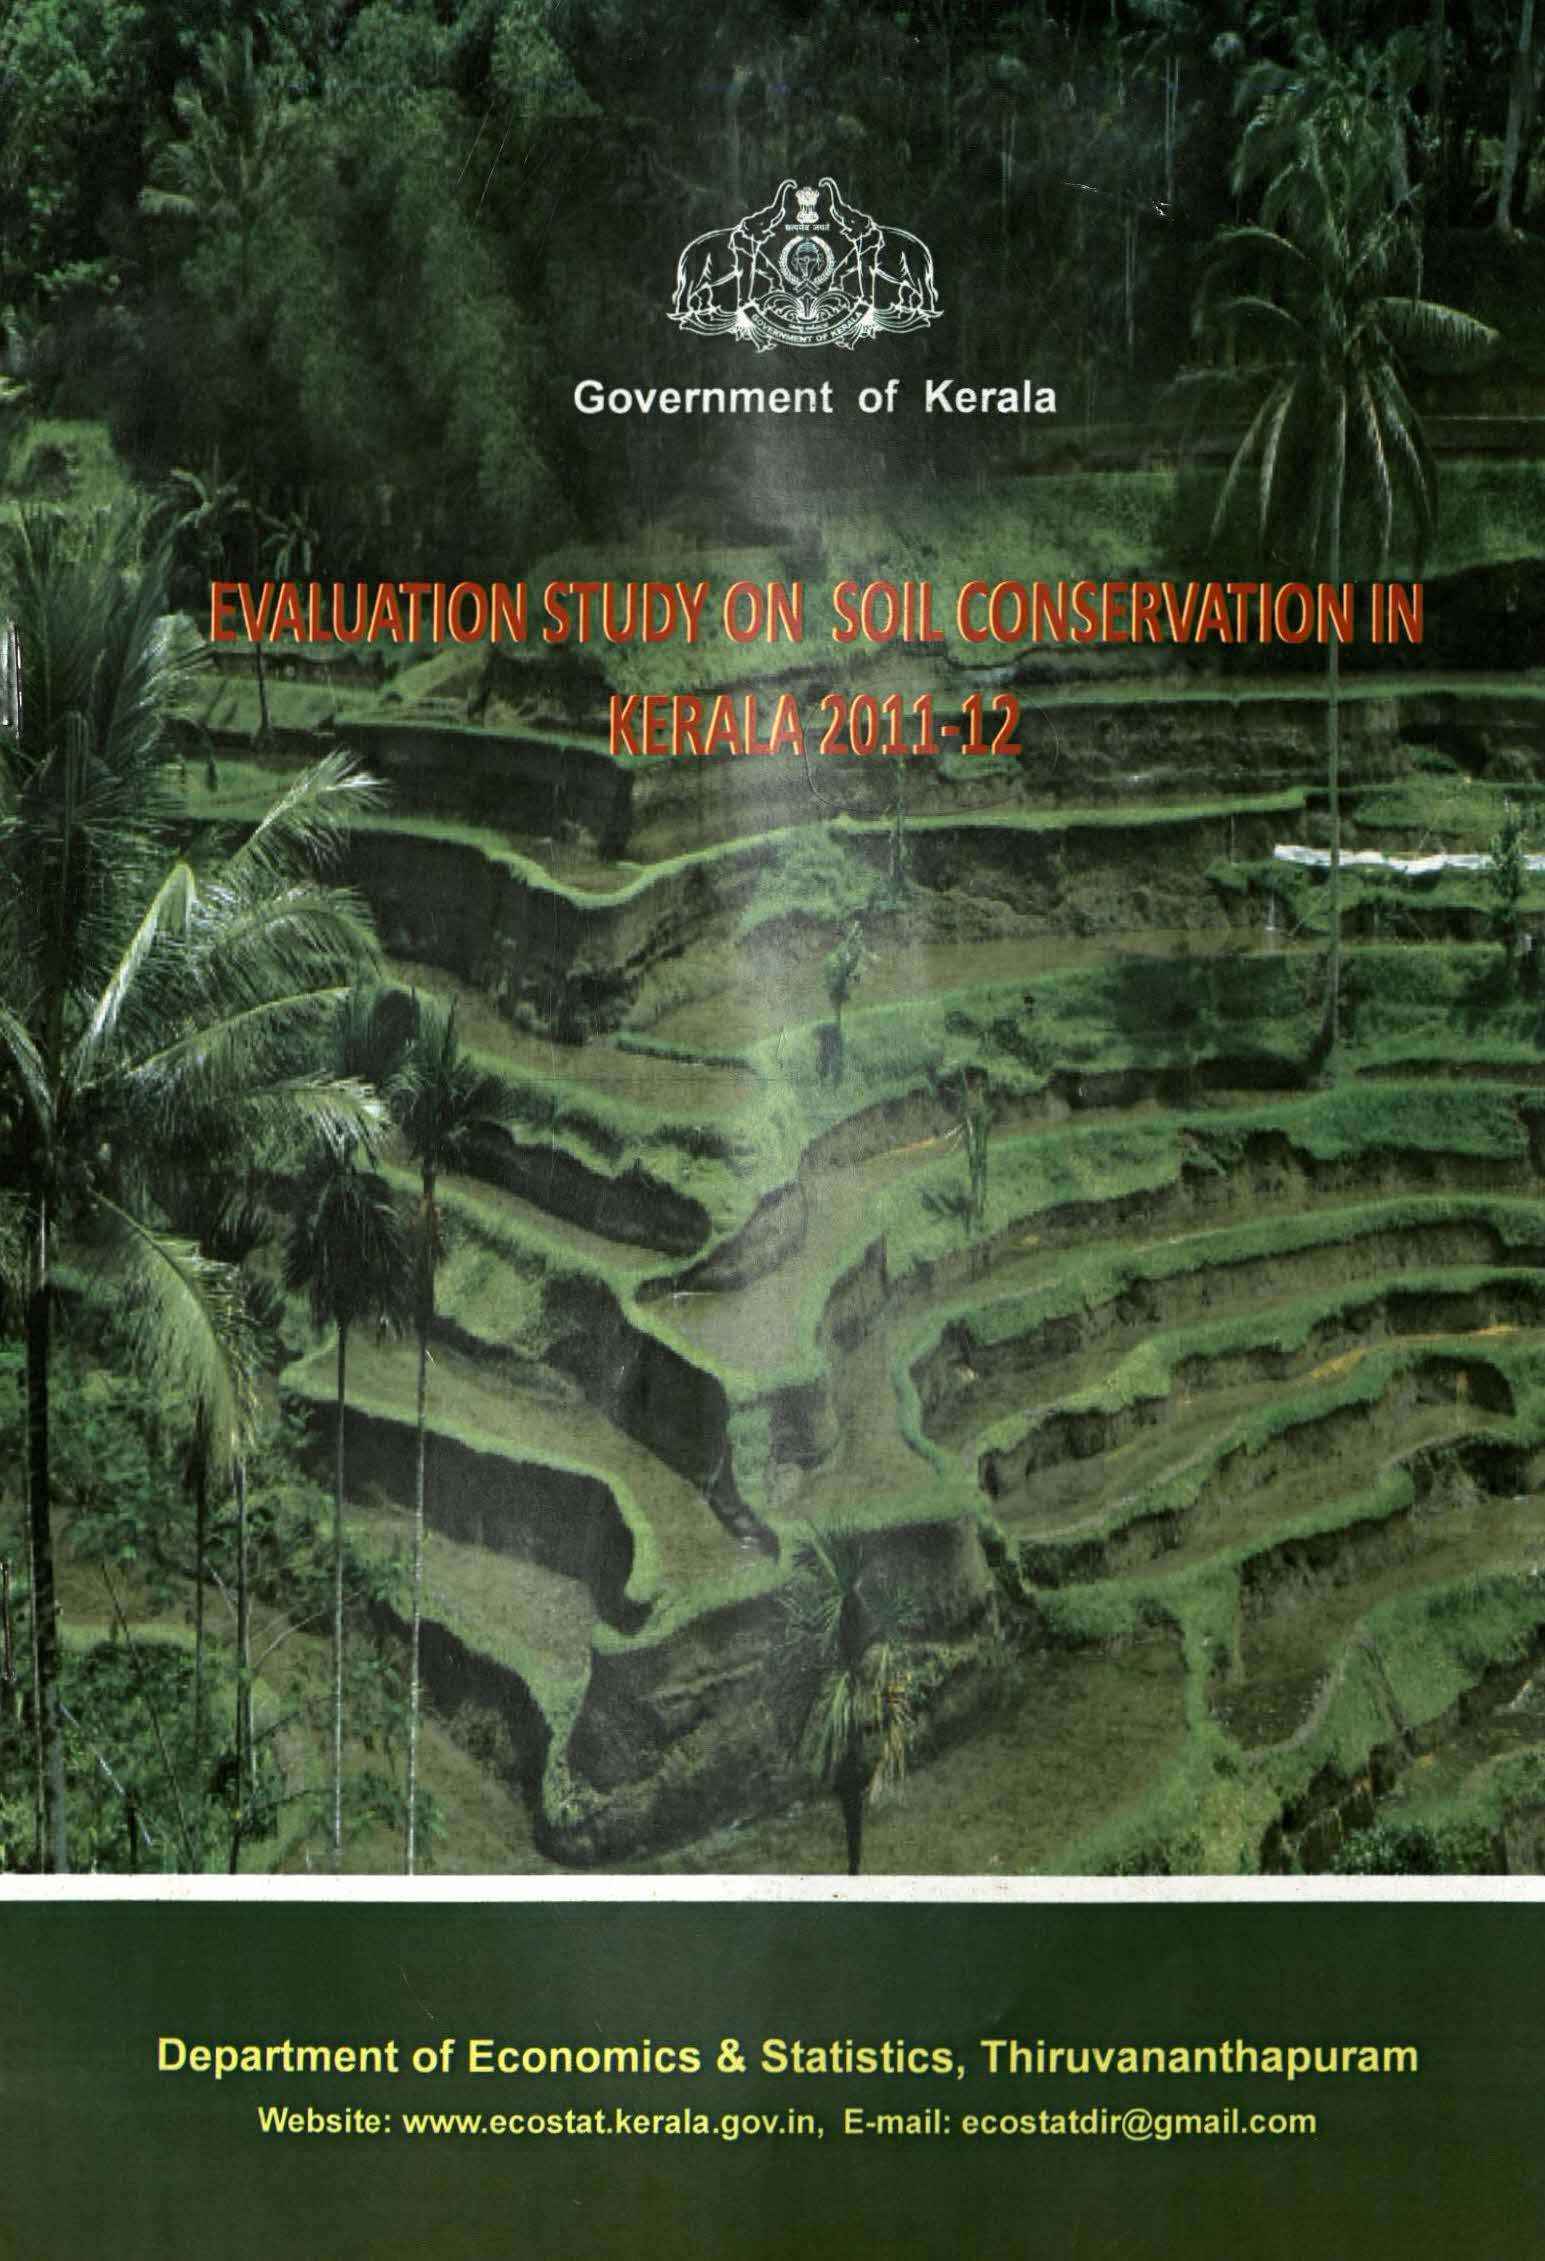 Evaluation study on Soil Conservation in Kerala 2011-12